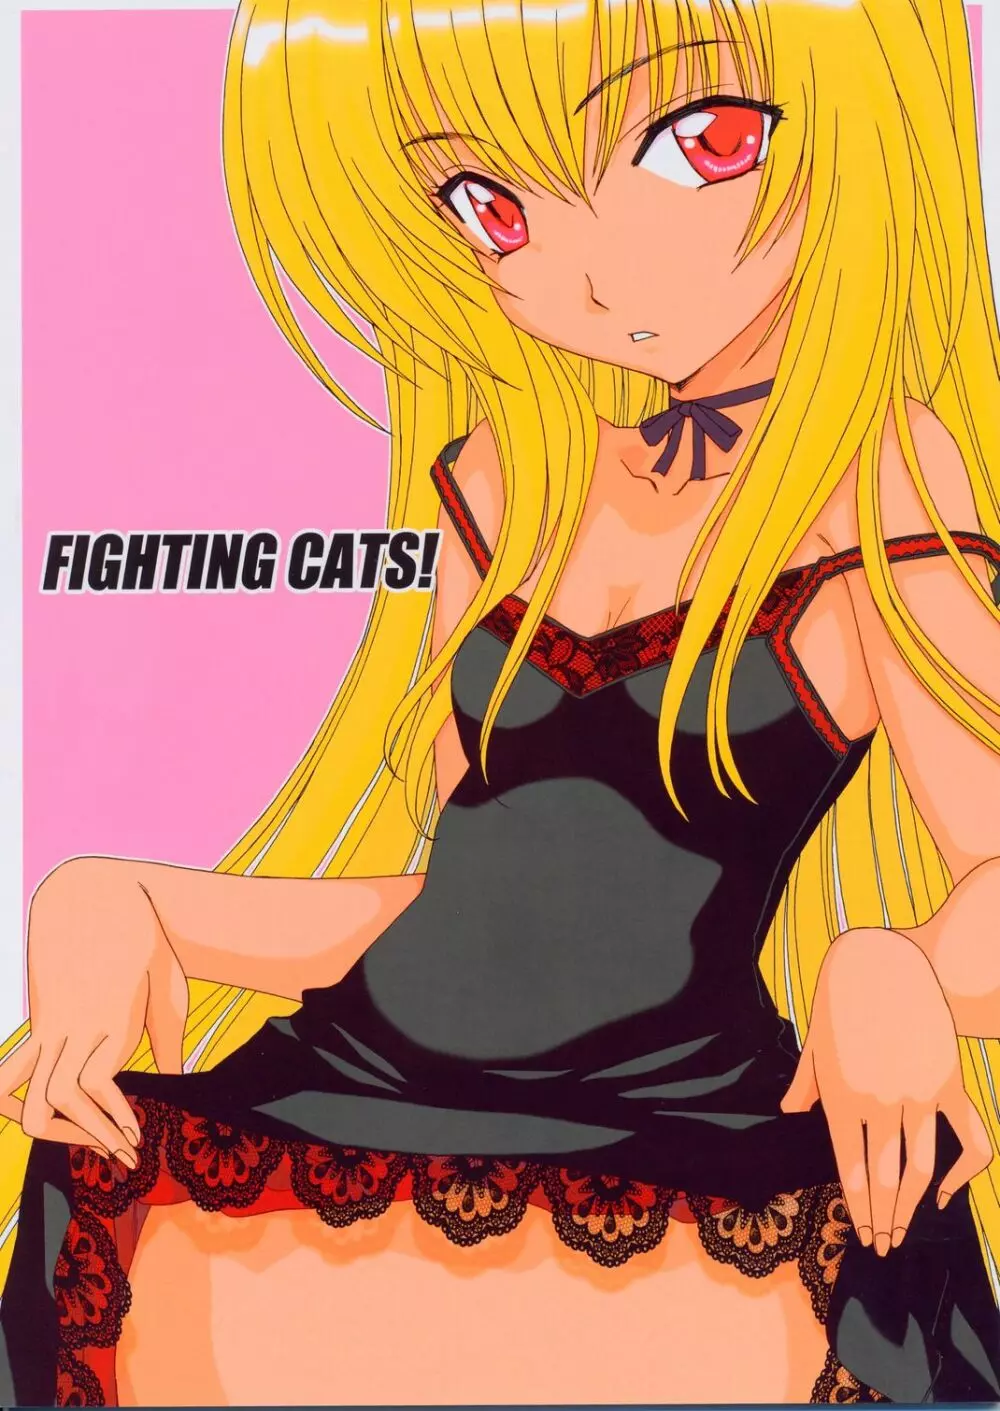 FIGHTING CATS!